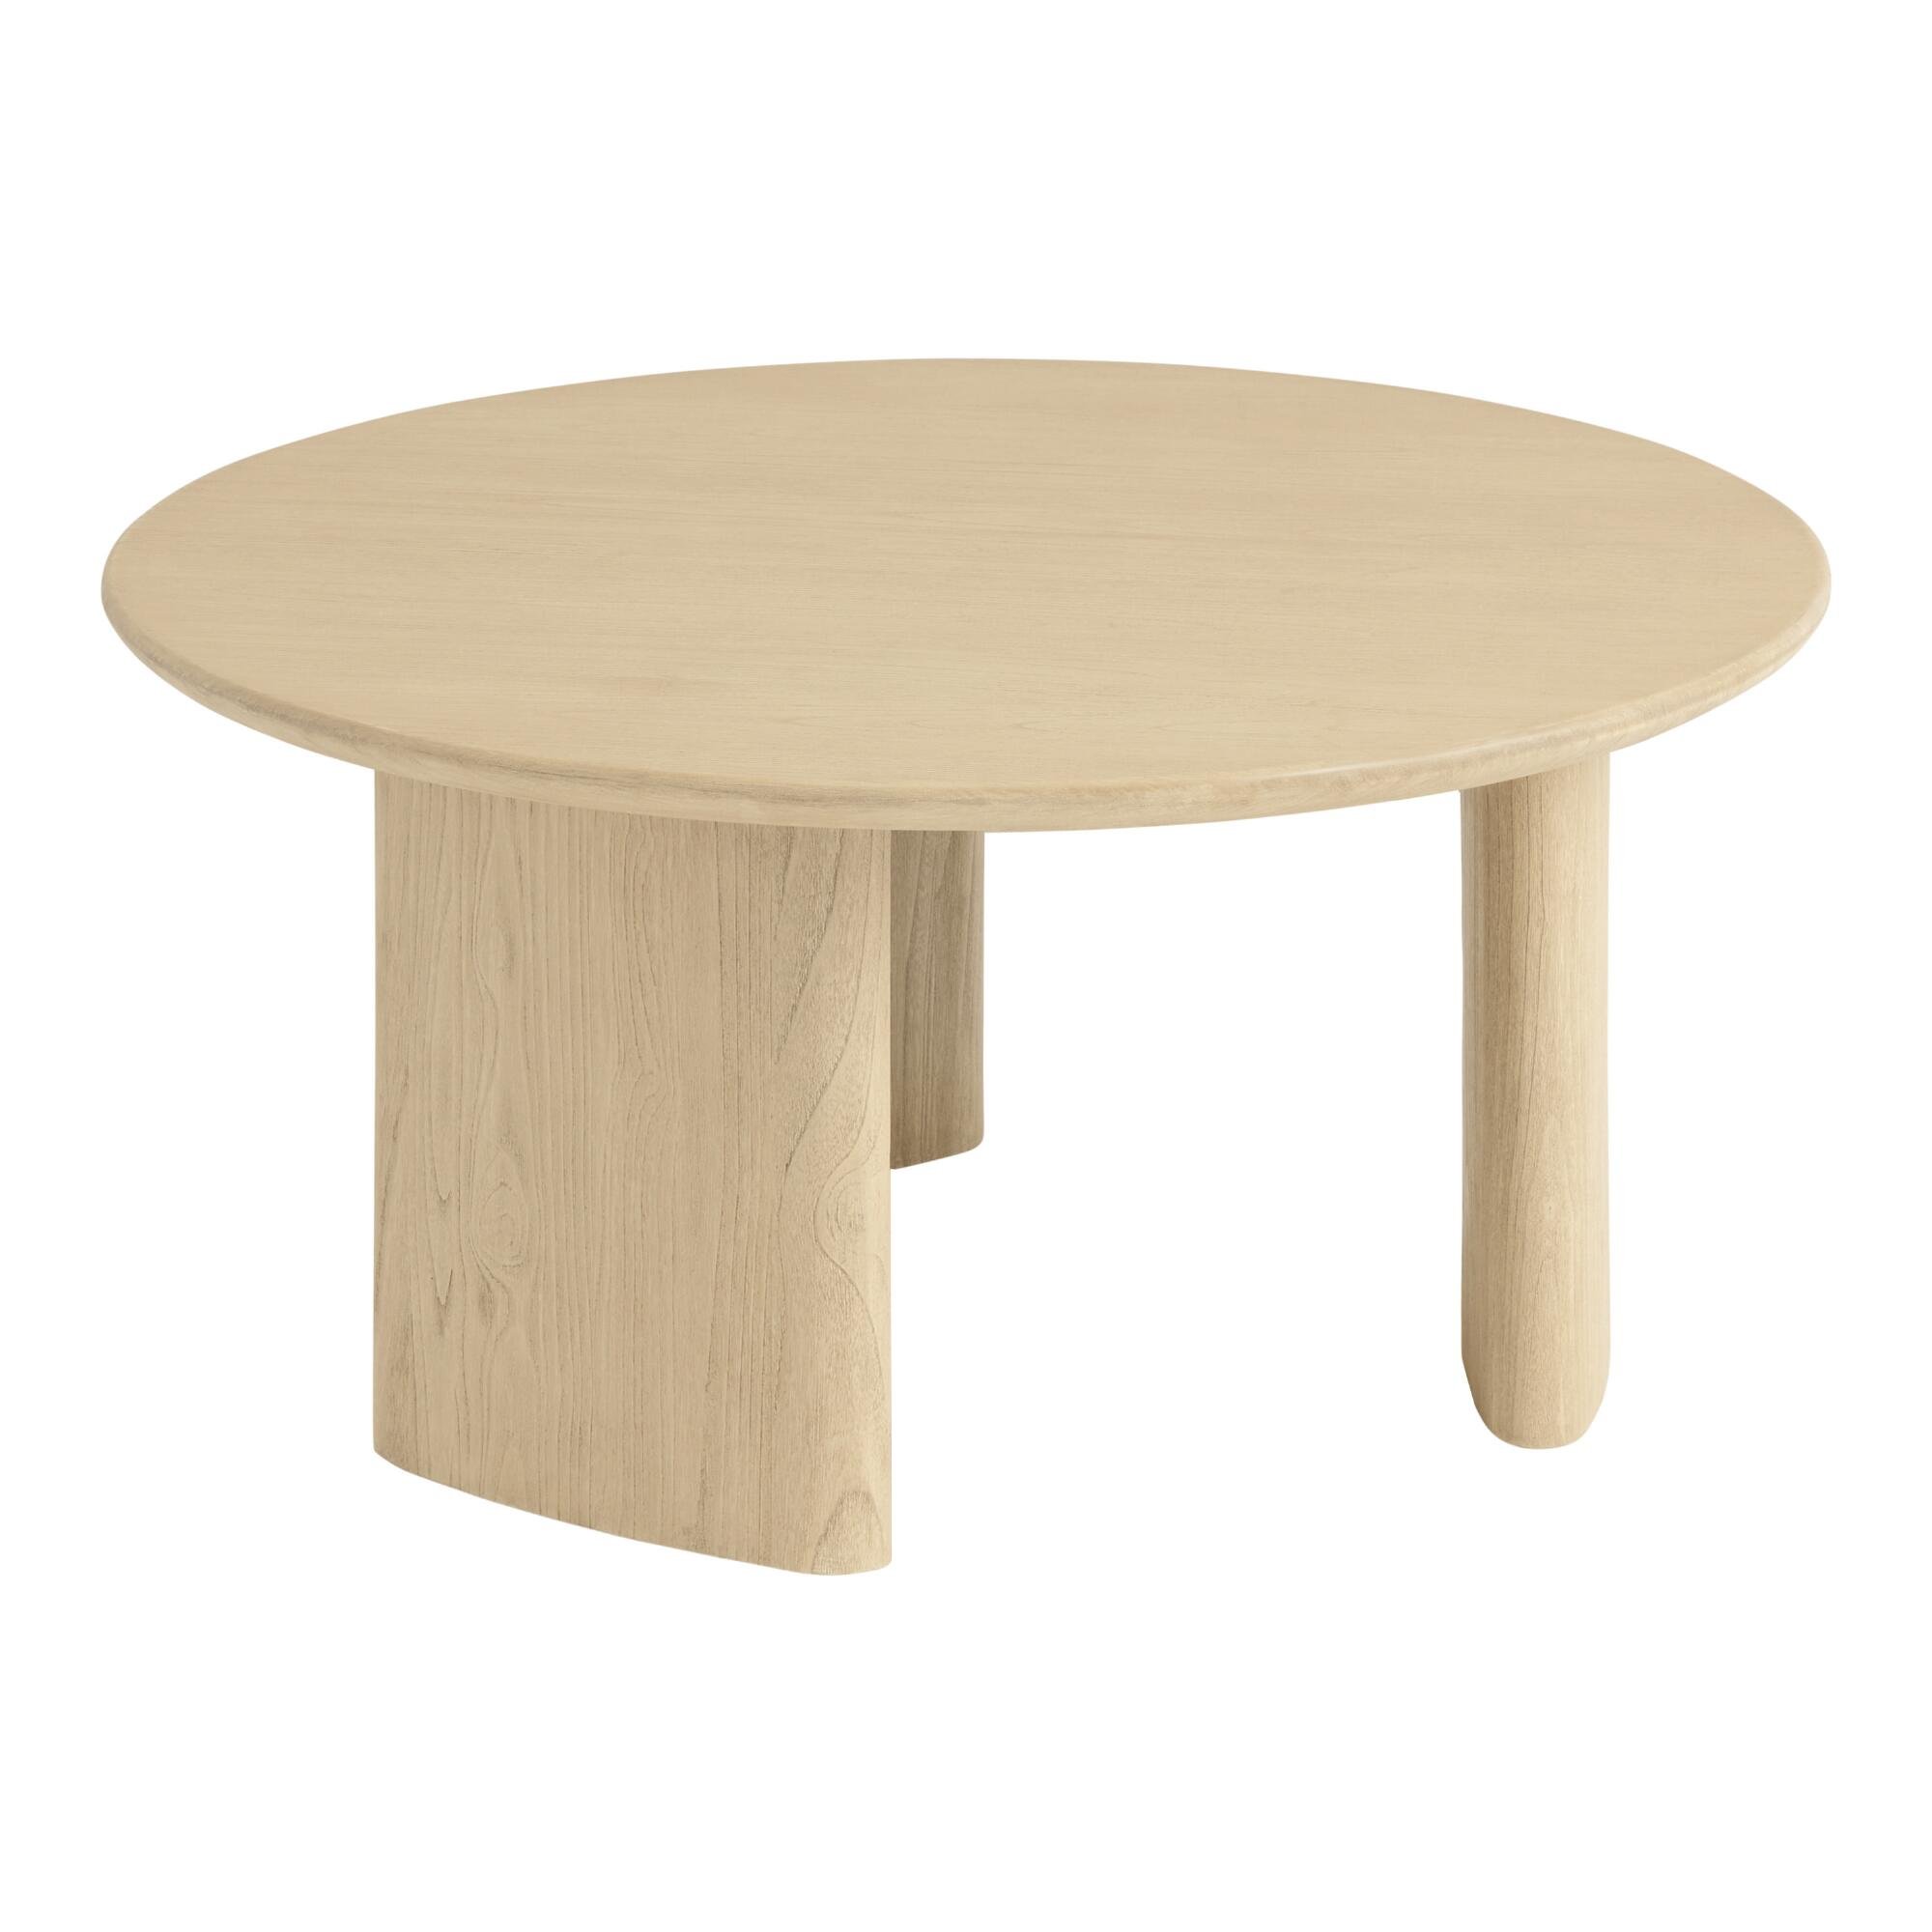 Round Natural Wood Zeke Coffee Table - World Market - $399.99